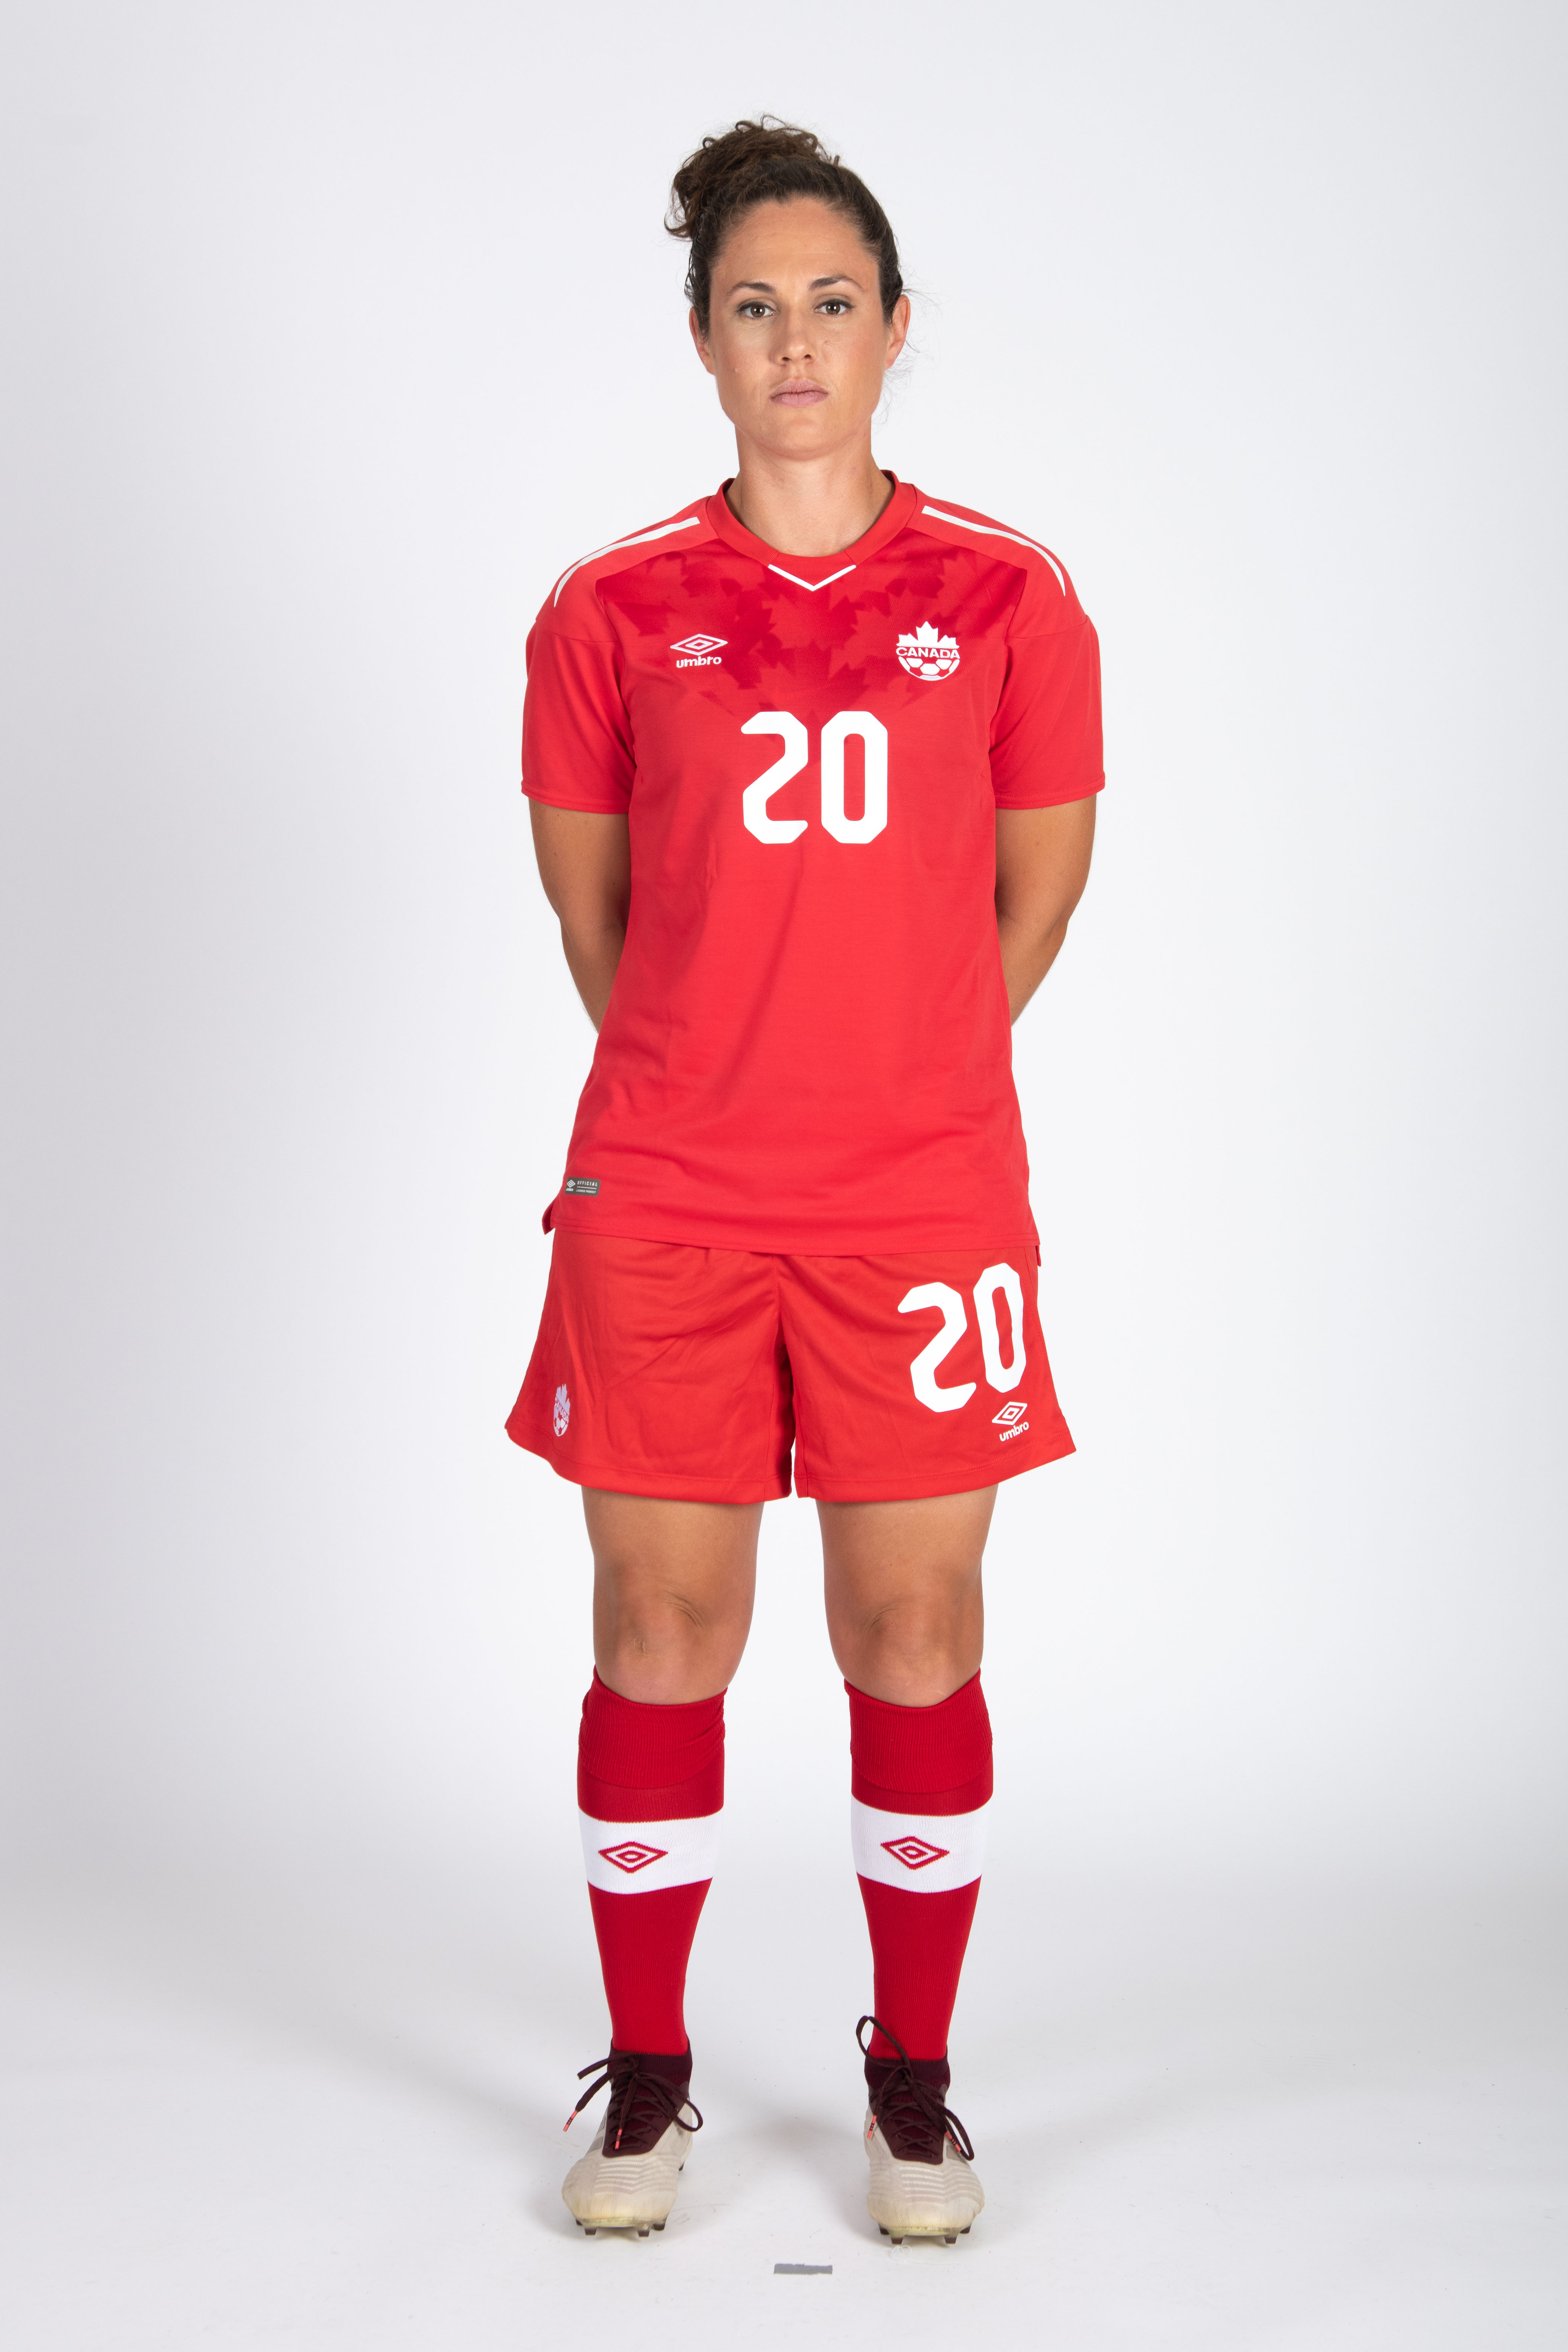 20180604_CANWNT_Woeller_byBazyl02